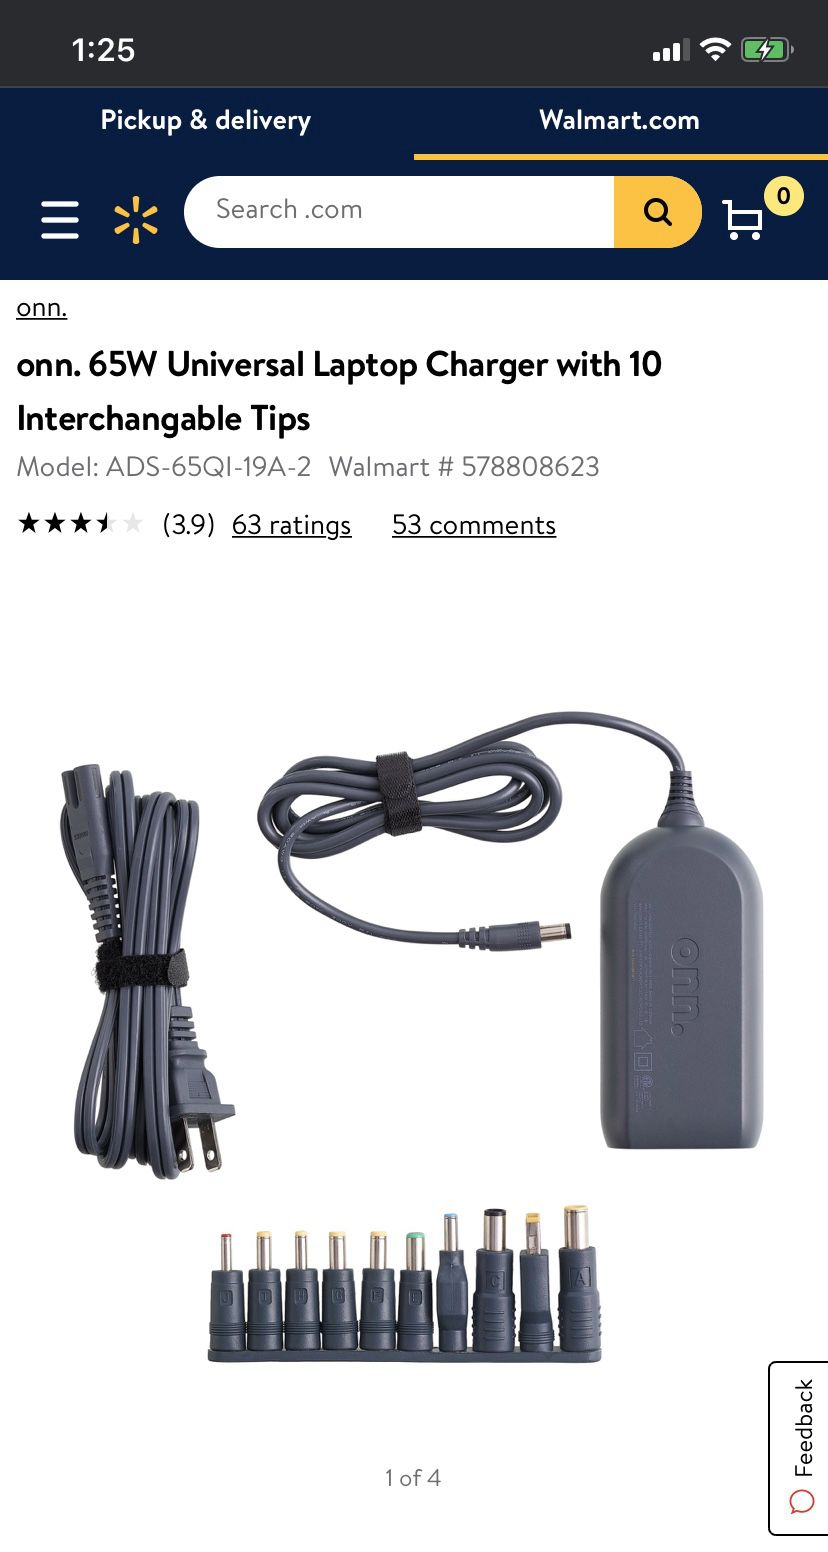 onn. 65W Universal Laptop Charger with 10 Interchangable Tips